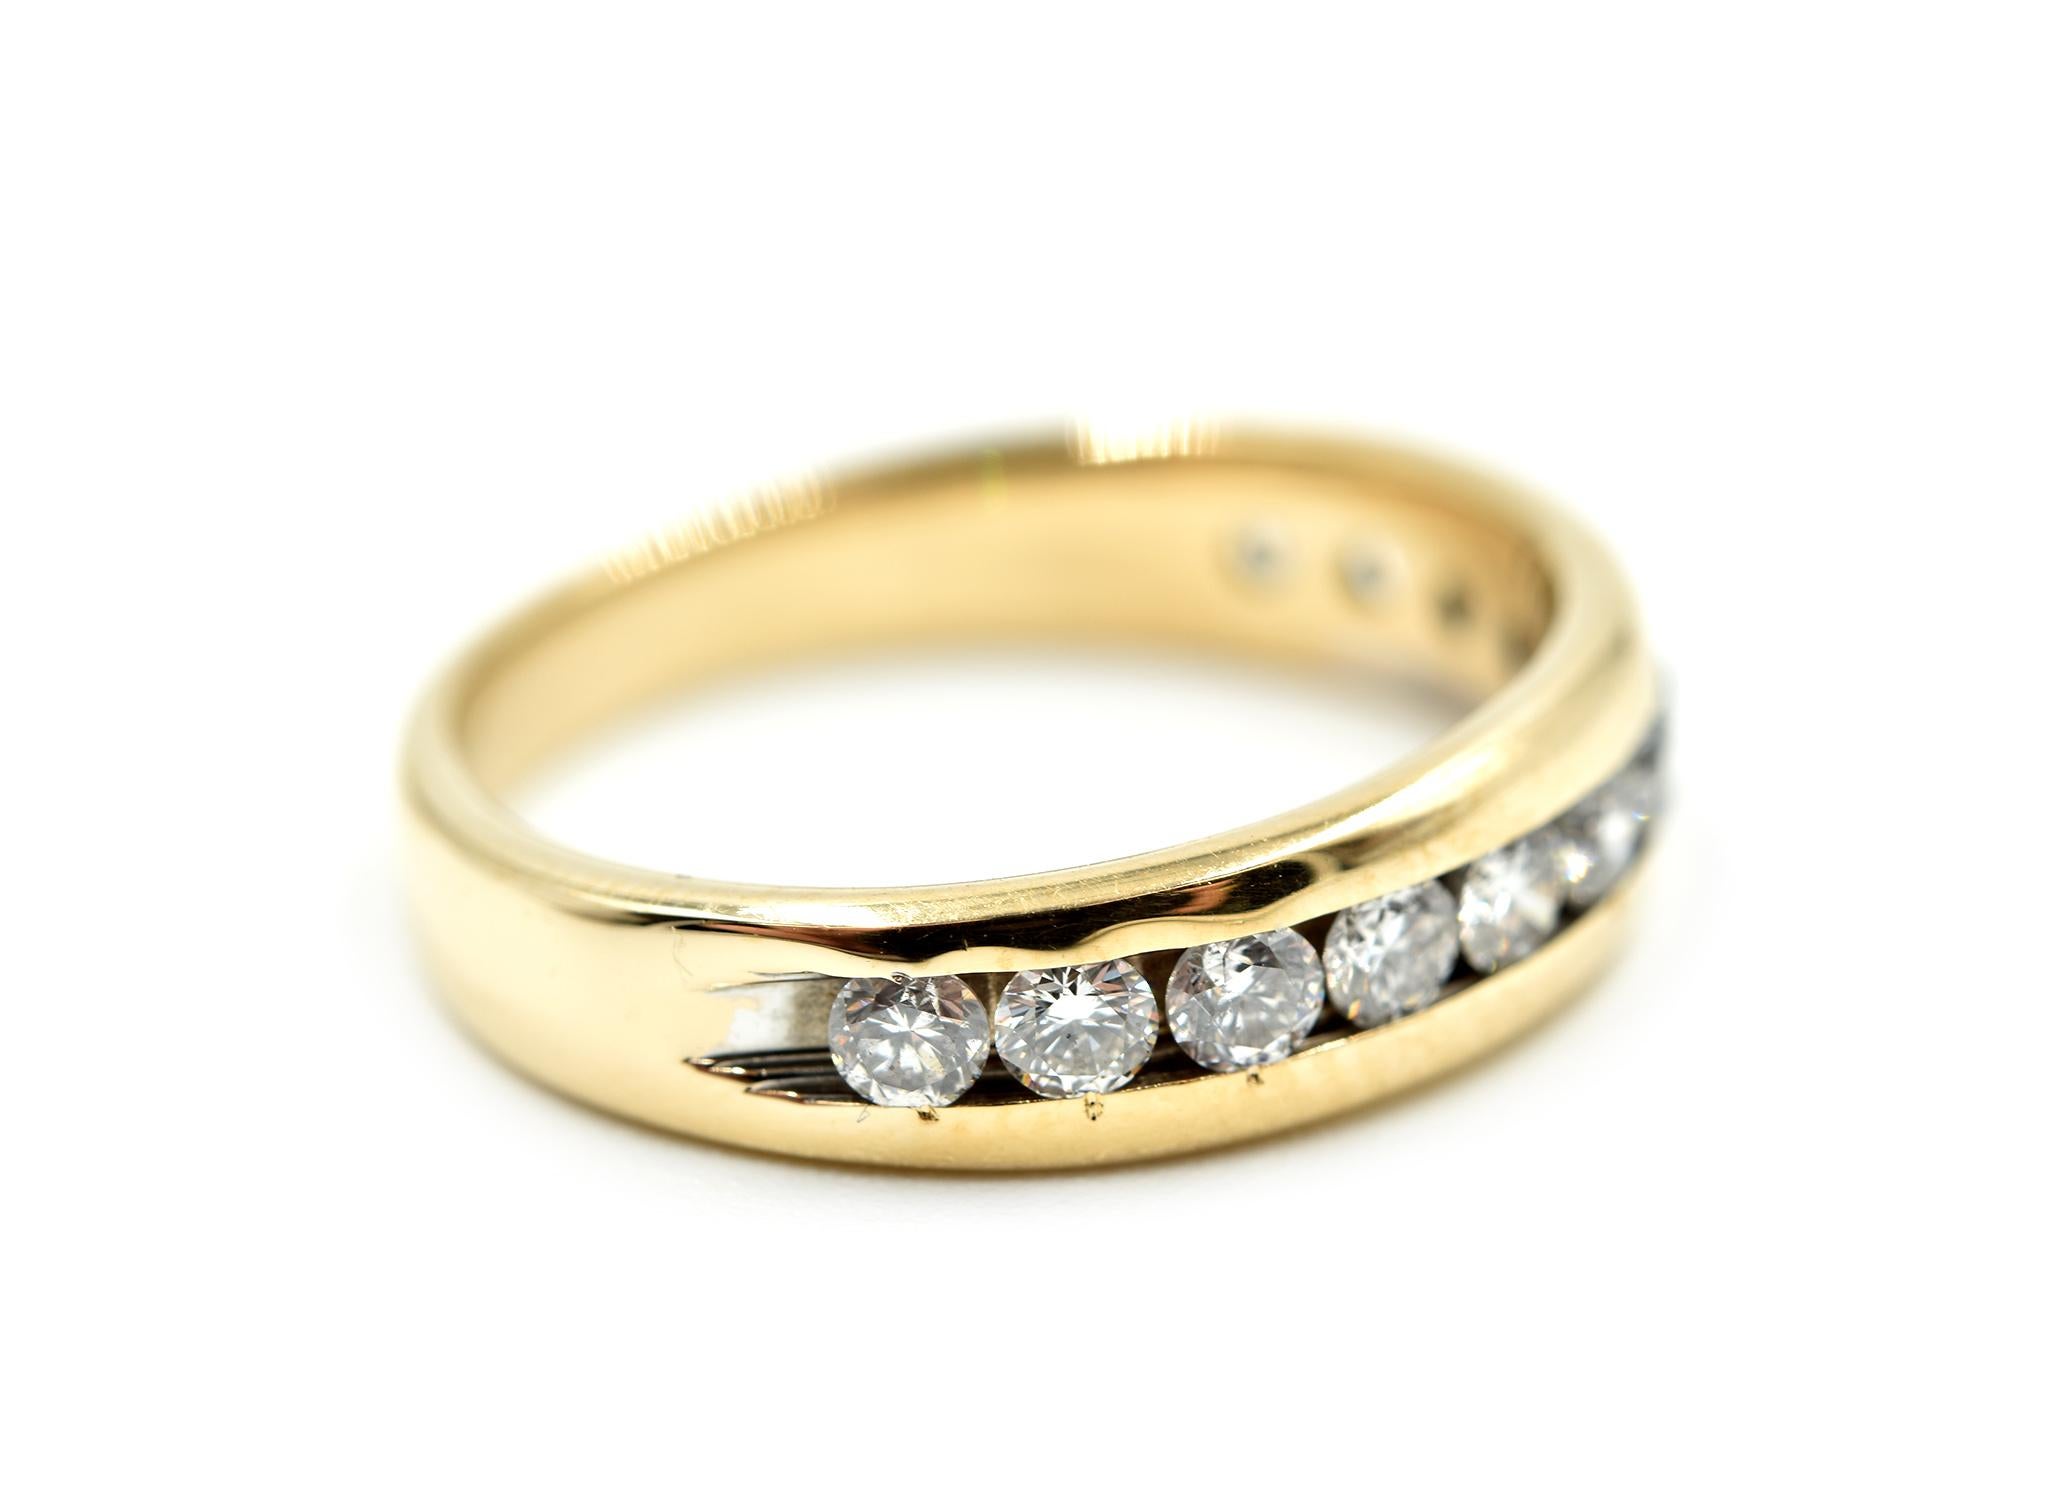 Designer: custom design
Material: 14k yellow gold
Diamonds: 12 round brilliant cuts = 0.72 carat total weight
Dimensions: ring top is 4.65mm long
Ring size: 5
Weight: 2.90 grams
